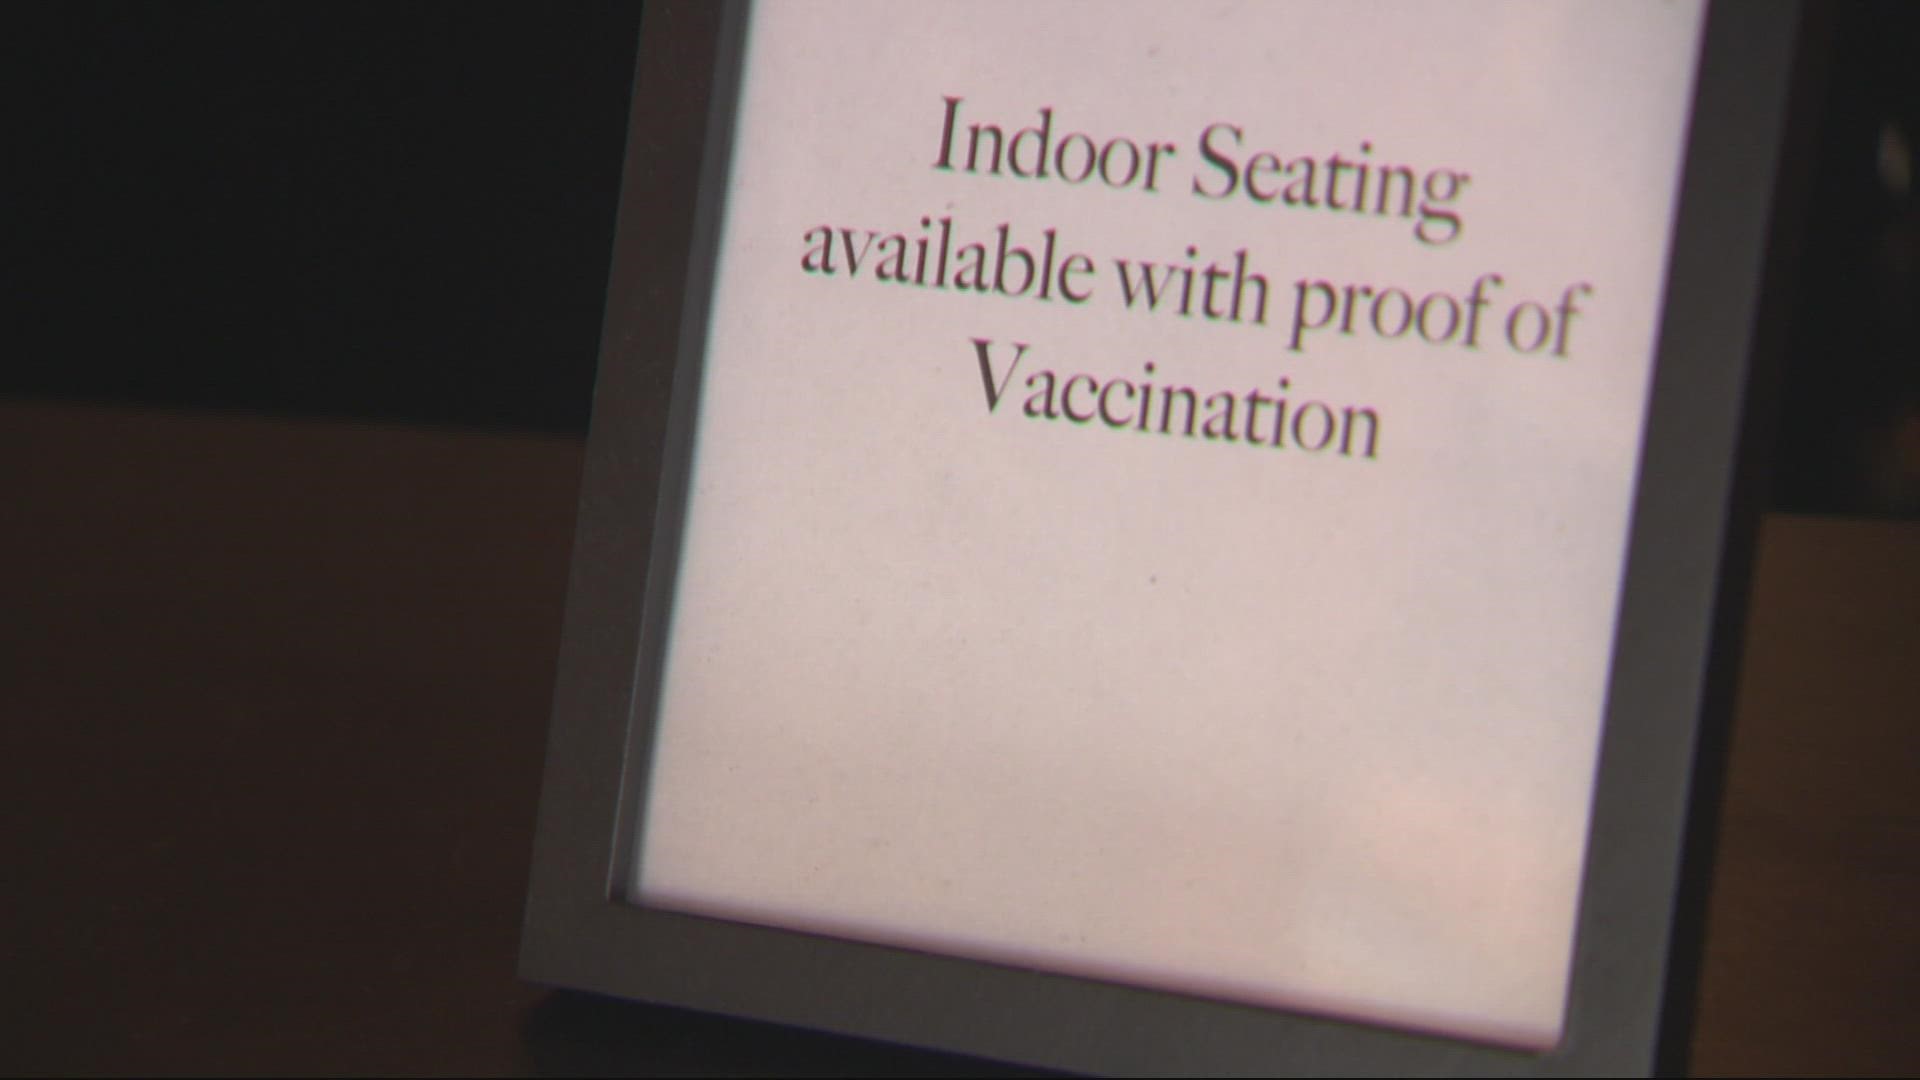 Some of Portland most popular bars, restaurants and venues will require proof of vaccination for anyone going inside.